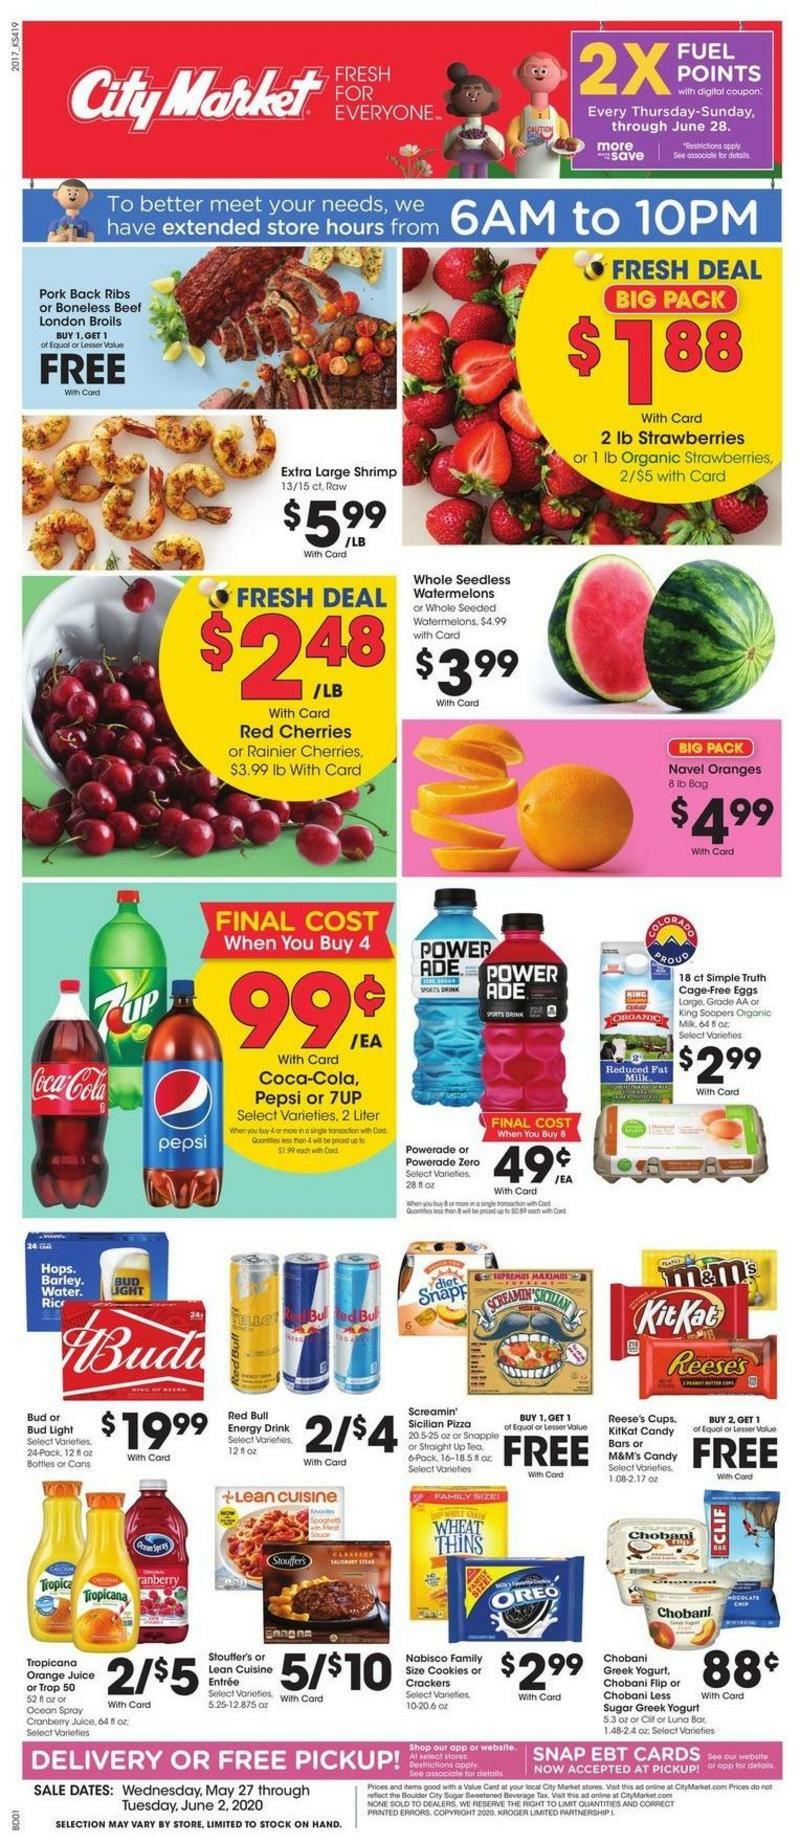 City Market Weekly Ad from May 27